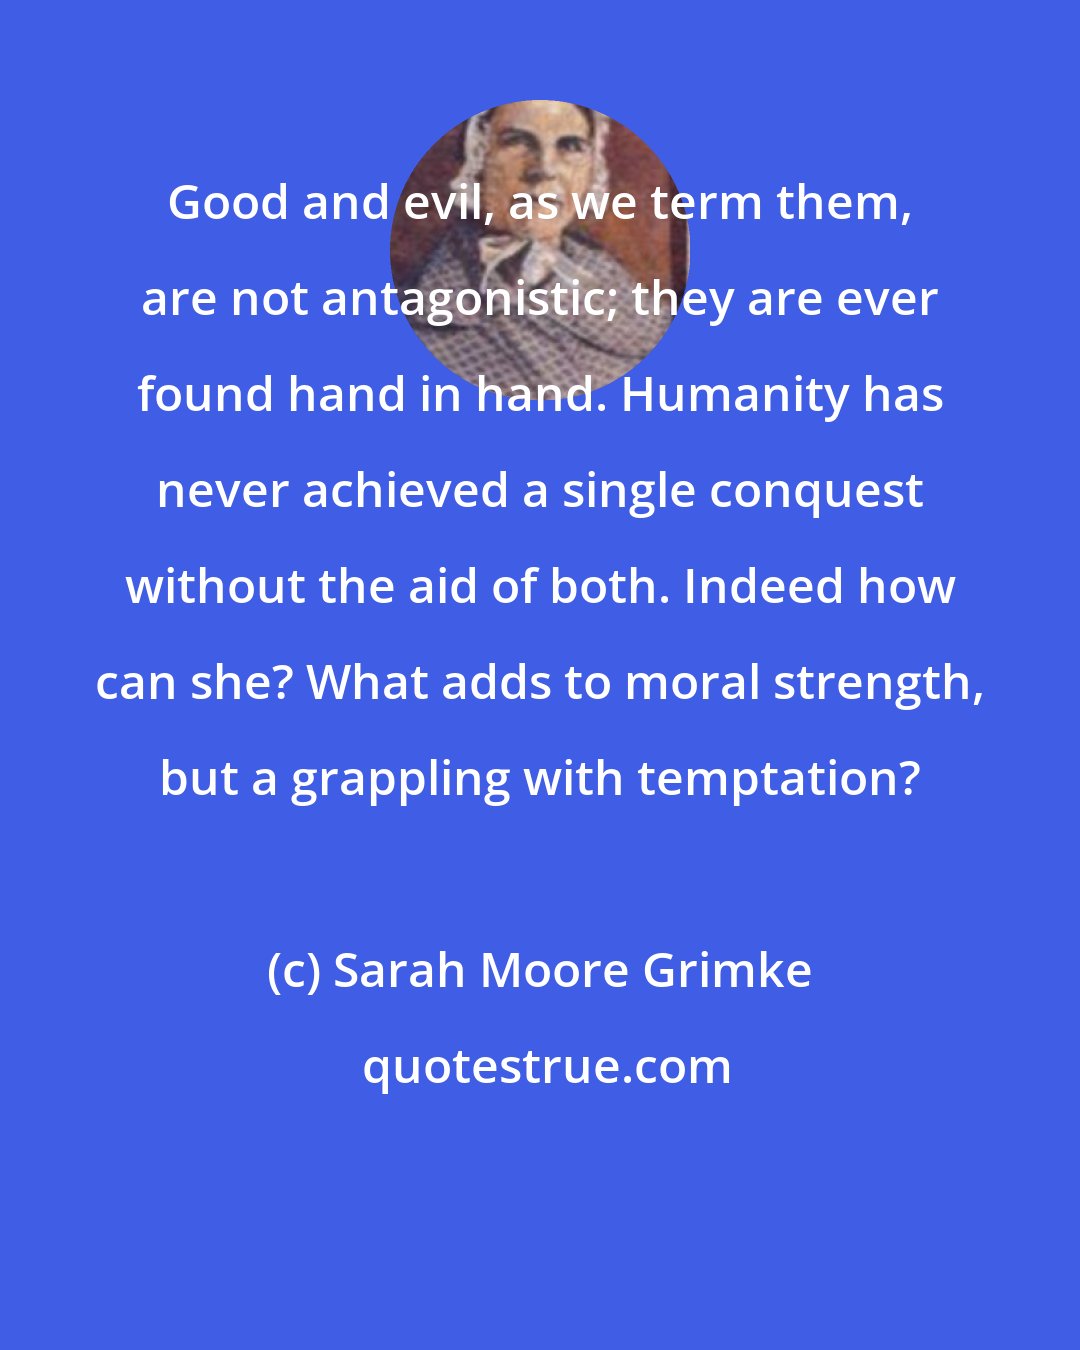 Sarah Moore Grimke: Good and evil, as we term them, are not antagonistic; they are ever found hand in hand. Humanity has never achieved a single conquest without the aid of both. Indeed how can she? What adds to moral strength, but a grappling with temptation?